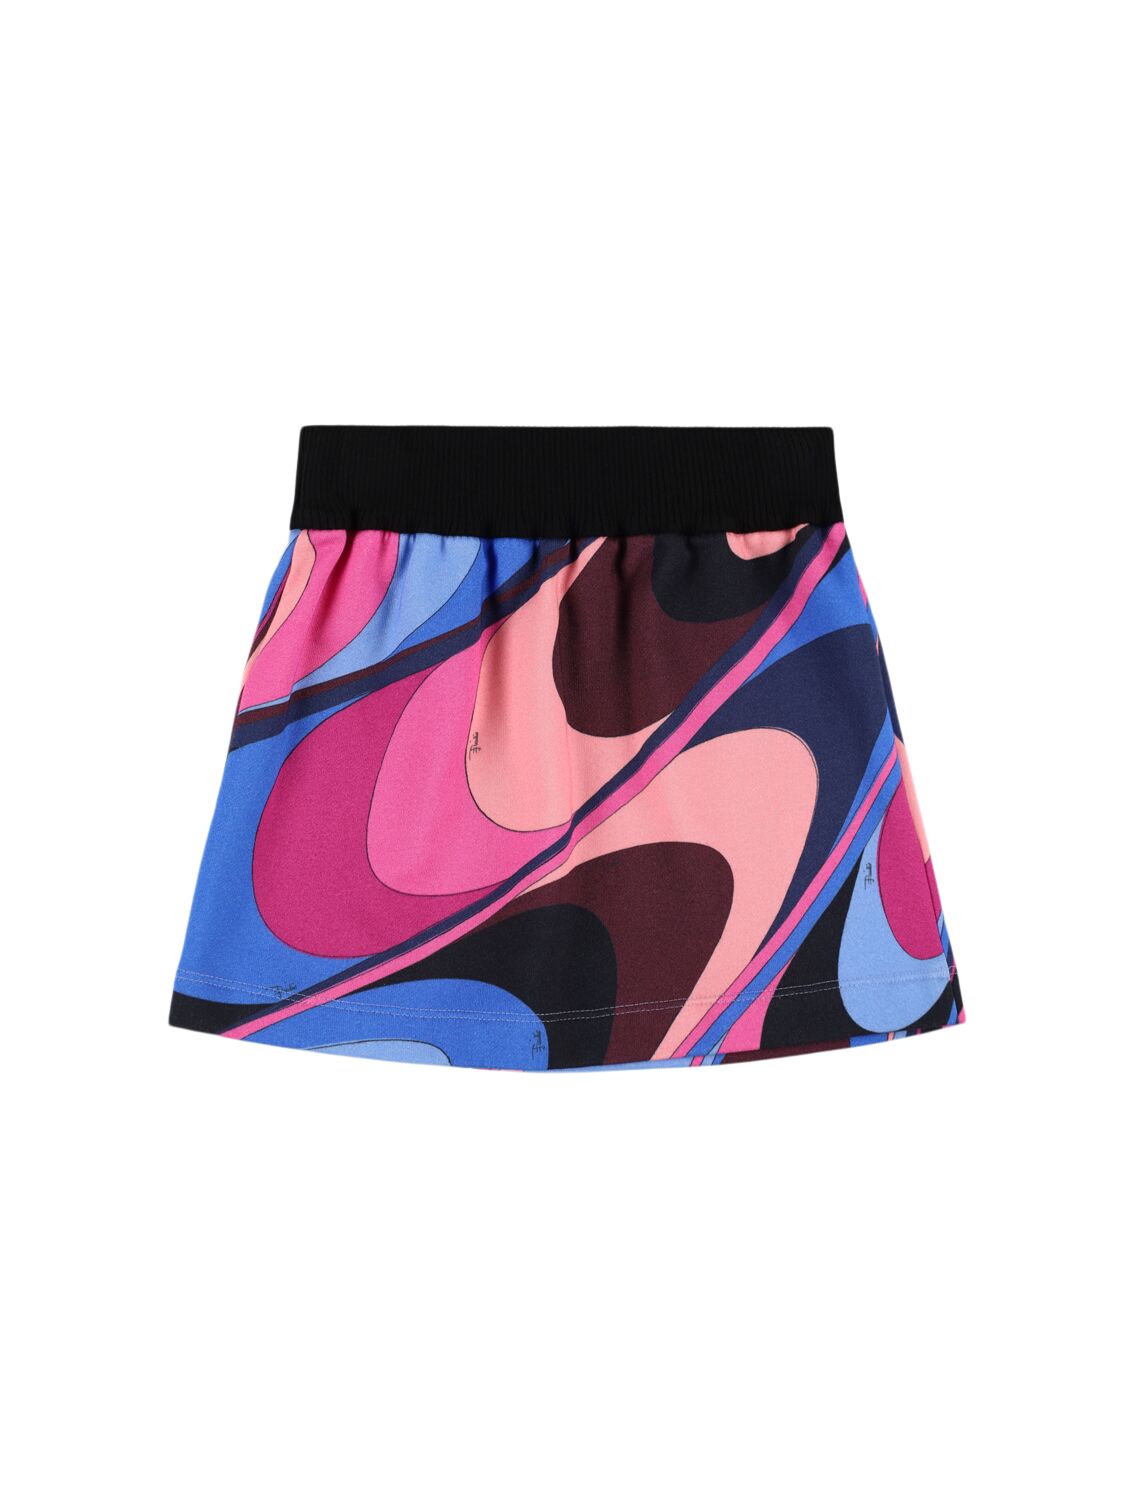 Pucci Printed Cotton Skirt In Multi